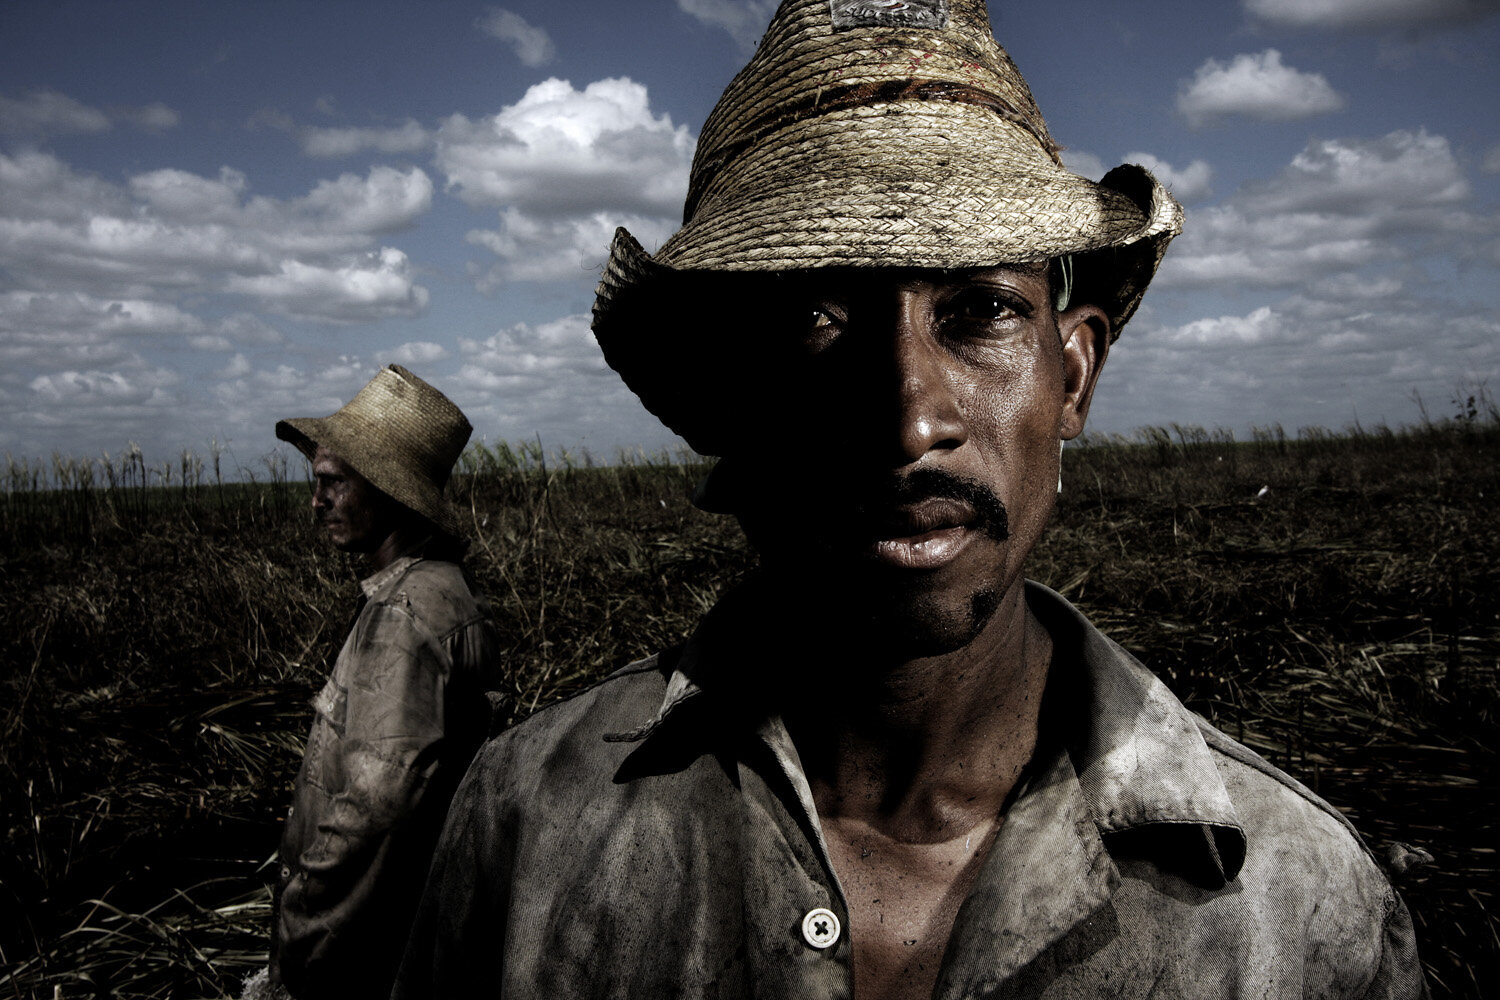  Vicente, 32, (front) and Daniel, 22, sugarcane cutter, pose for a potrait. Both men have been working for 4 years in the sugarcane industry.  